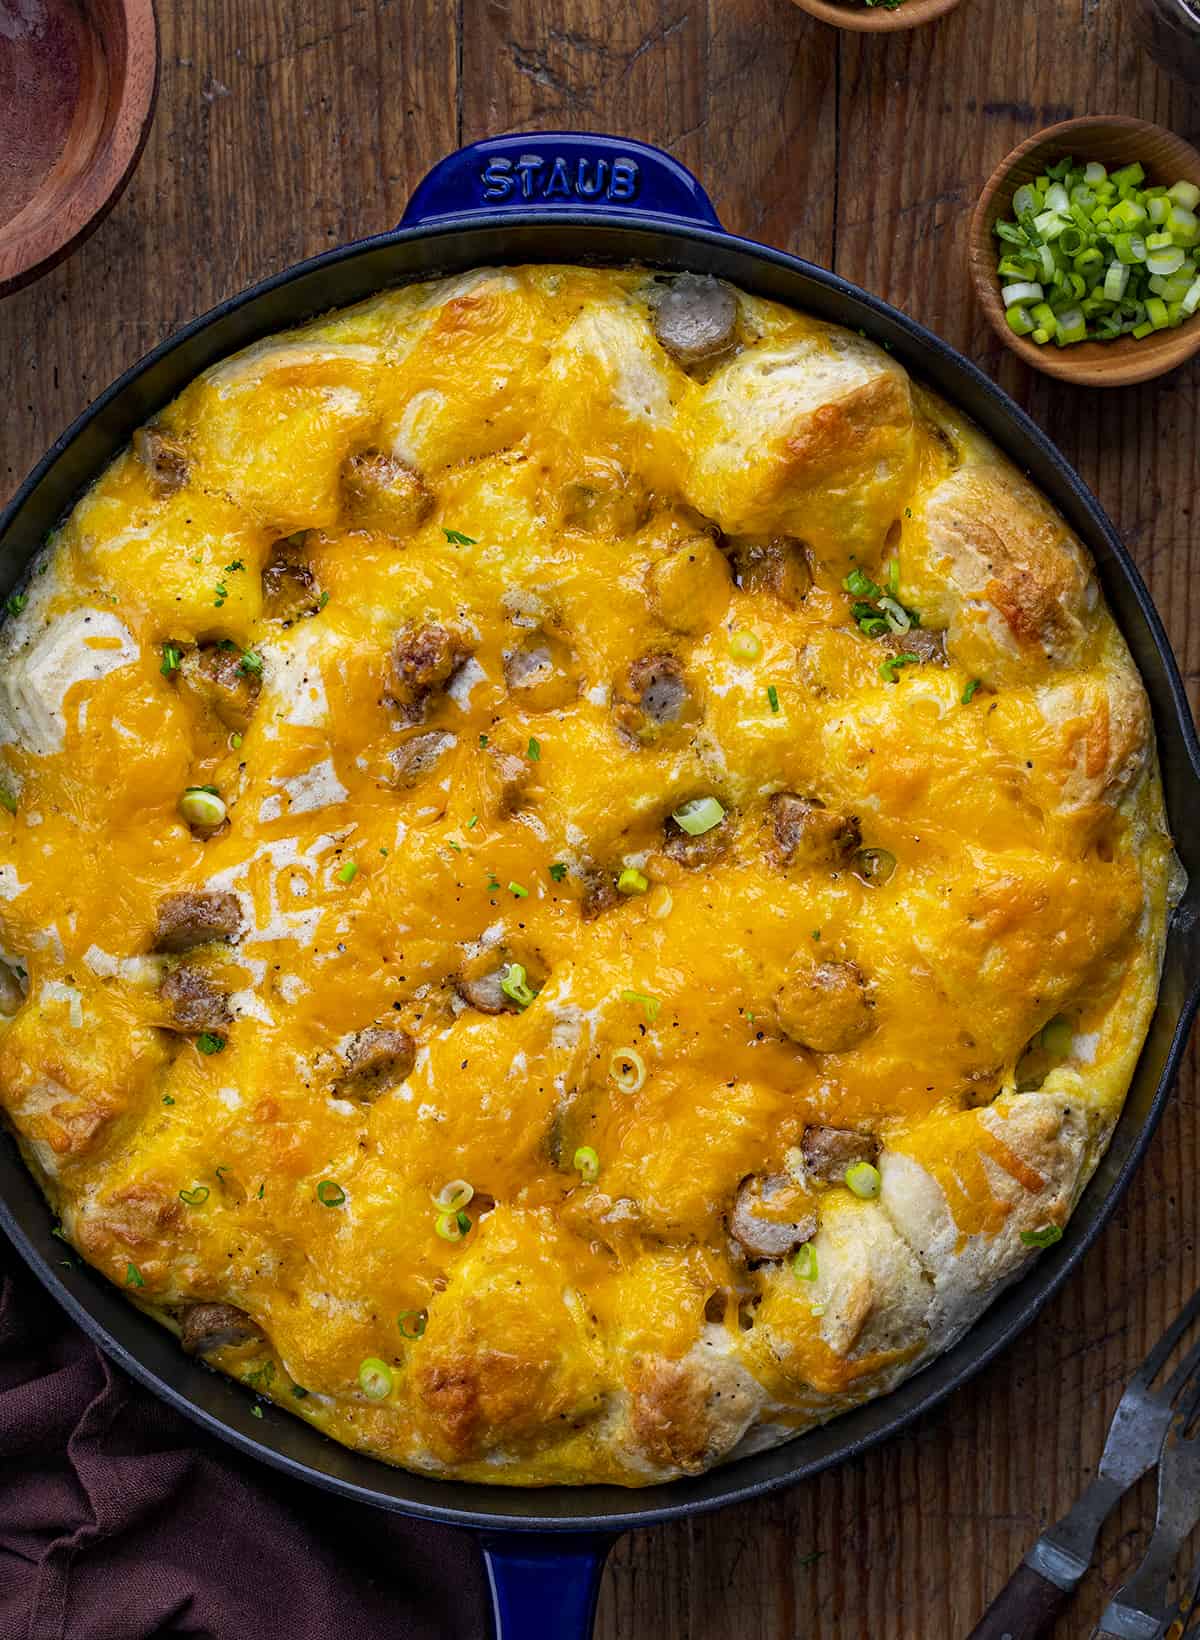 Cheesy Biscuits and Gravy Breakfast Bake in a Skillet. Breakfast, Breakfast Bake, Easy Breakfast, Brunch, Biscuits and Gravy Breakfast, Easy Breakfast Recipes, Cheesy Eggs, Kid Favorite Breakfast, Easy Recipes, Breakfast for Dinner, i am homesteader, iamhomesteader